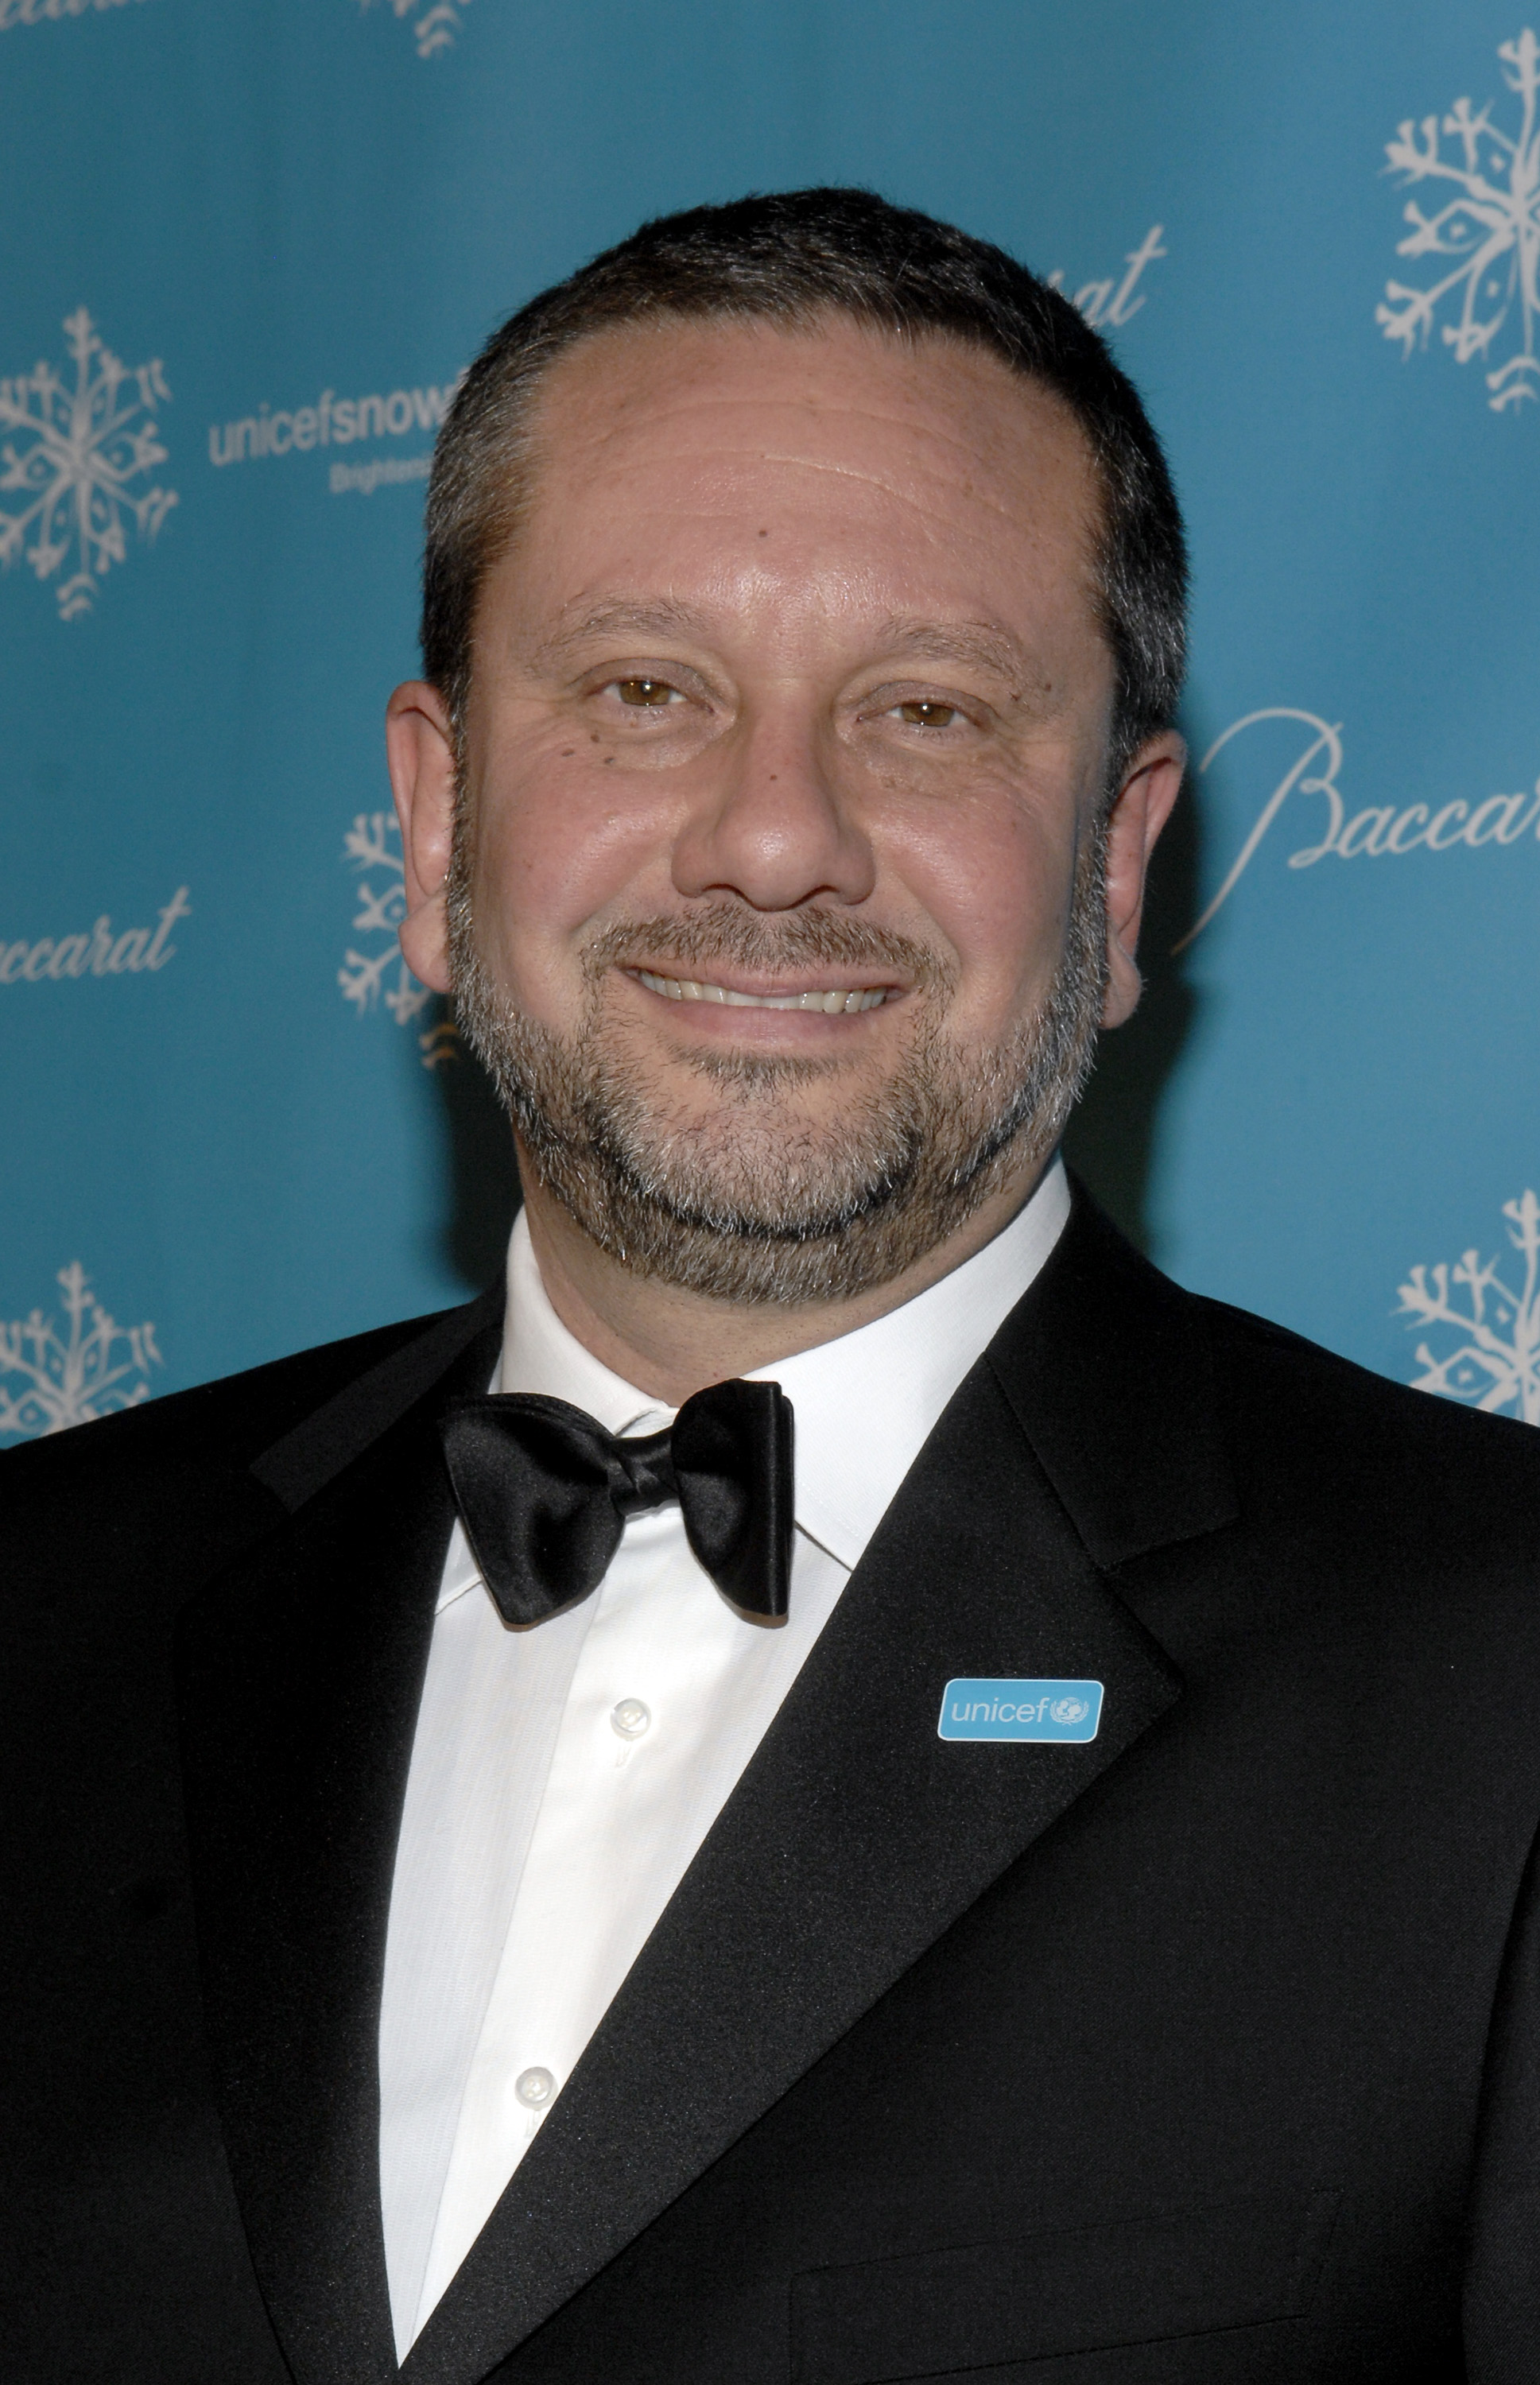 Sean Hepburn Ferrer during the Third Annual UNICEF Snowflake Ball in New York City on November 28, 2006 | Source: Getty Images